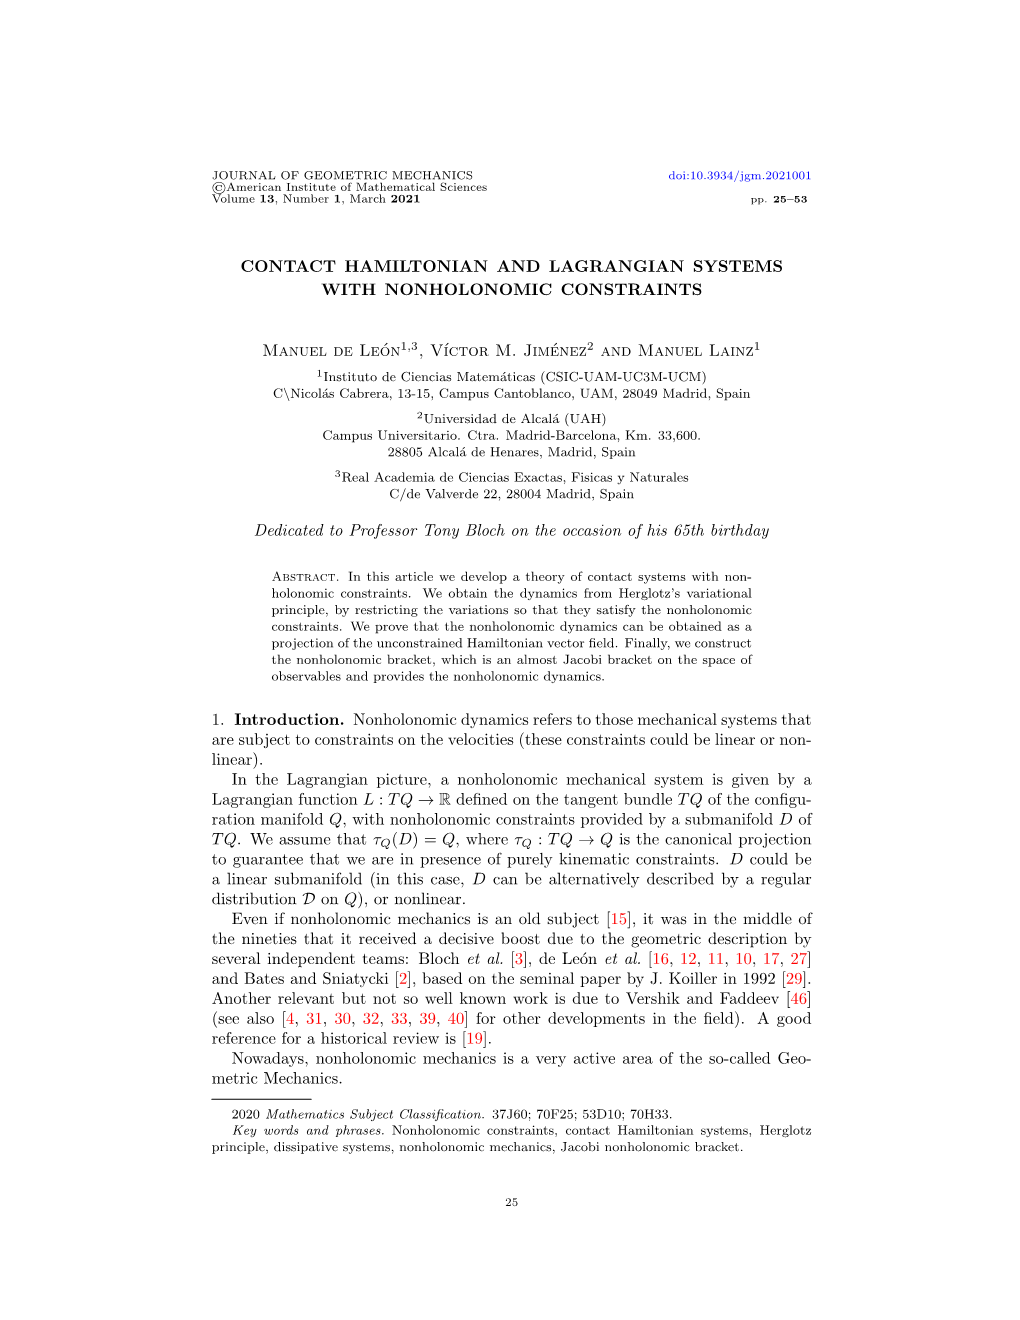 Contact Hamiltonian and Lagrangian Systems with Nonholonomic Constraints